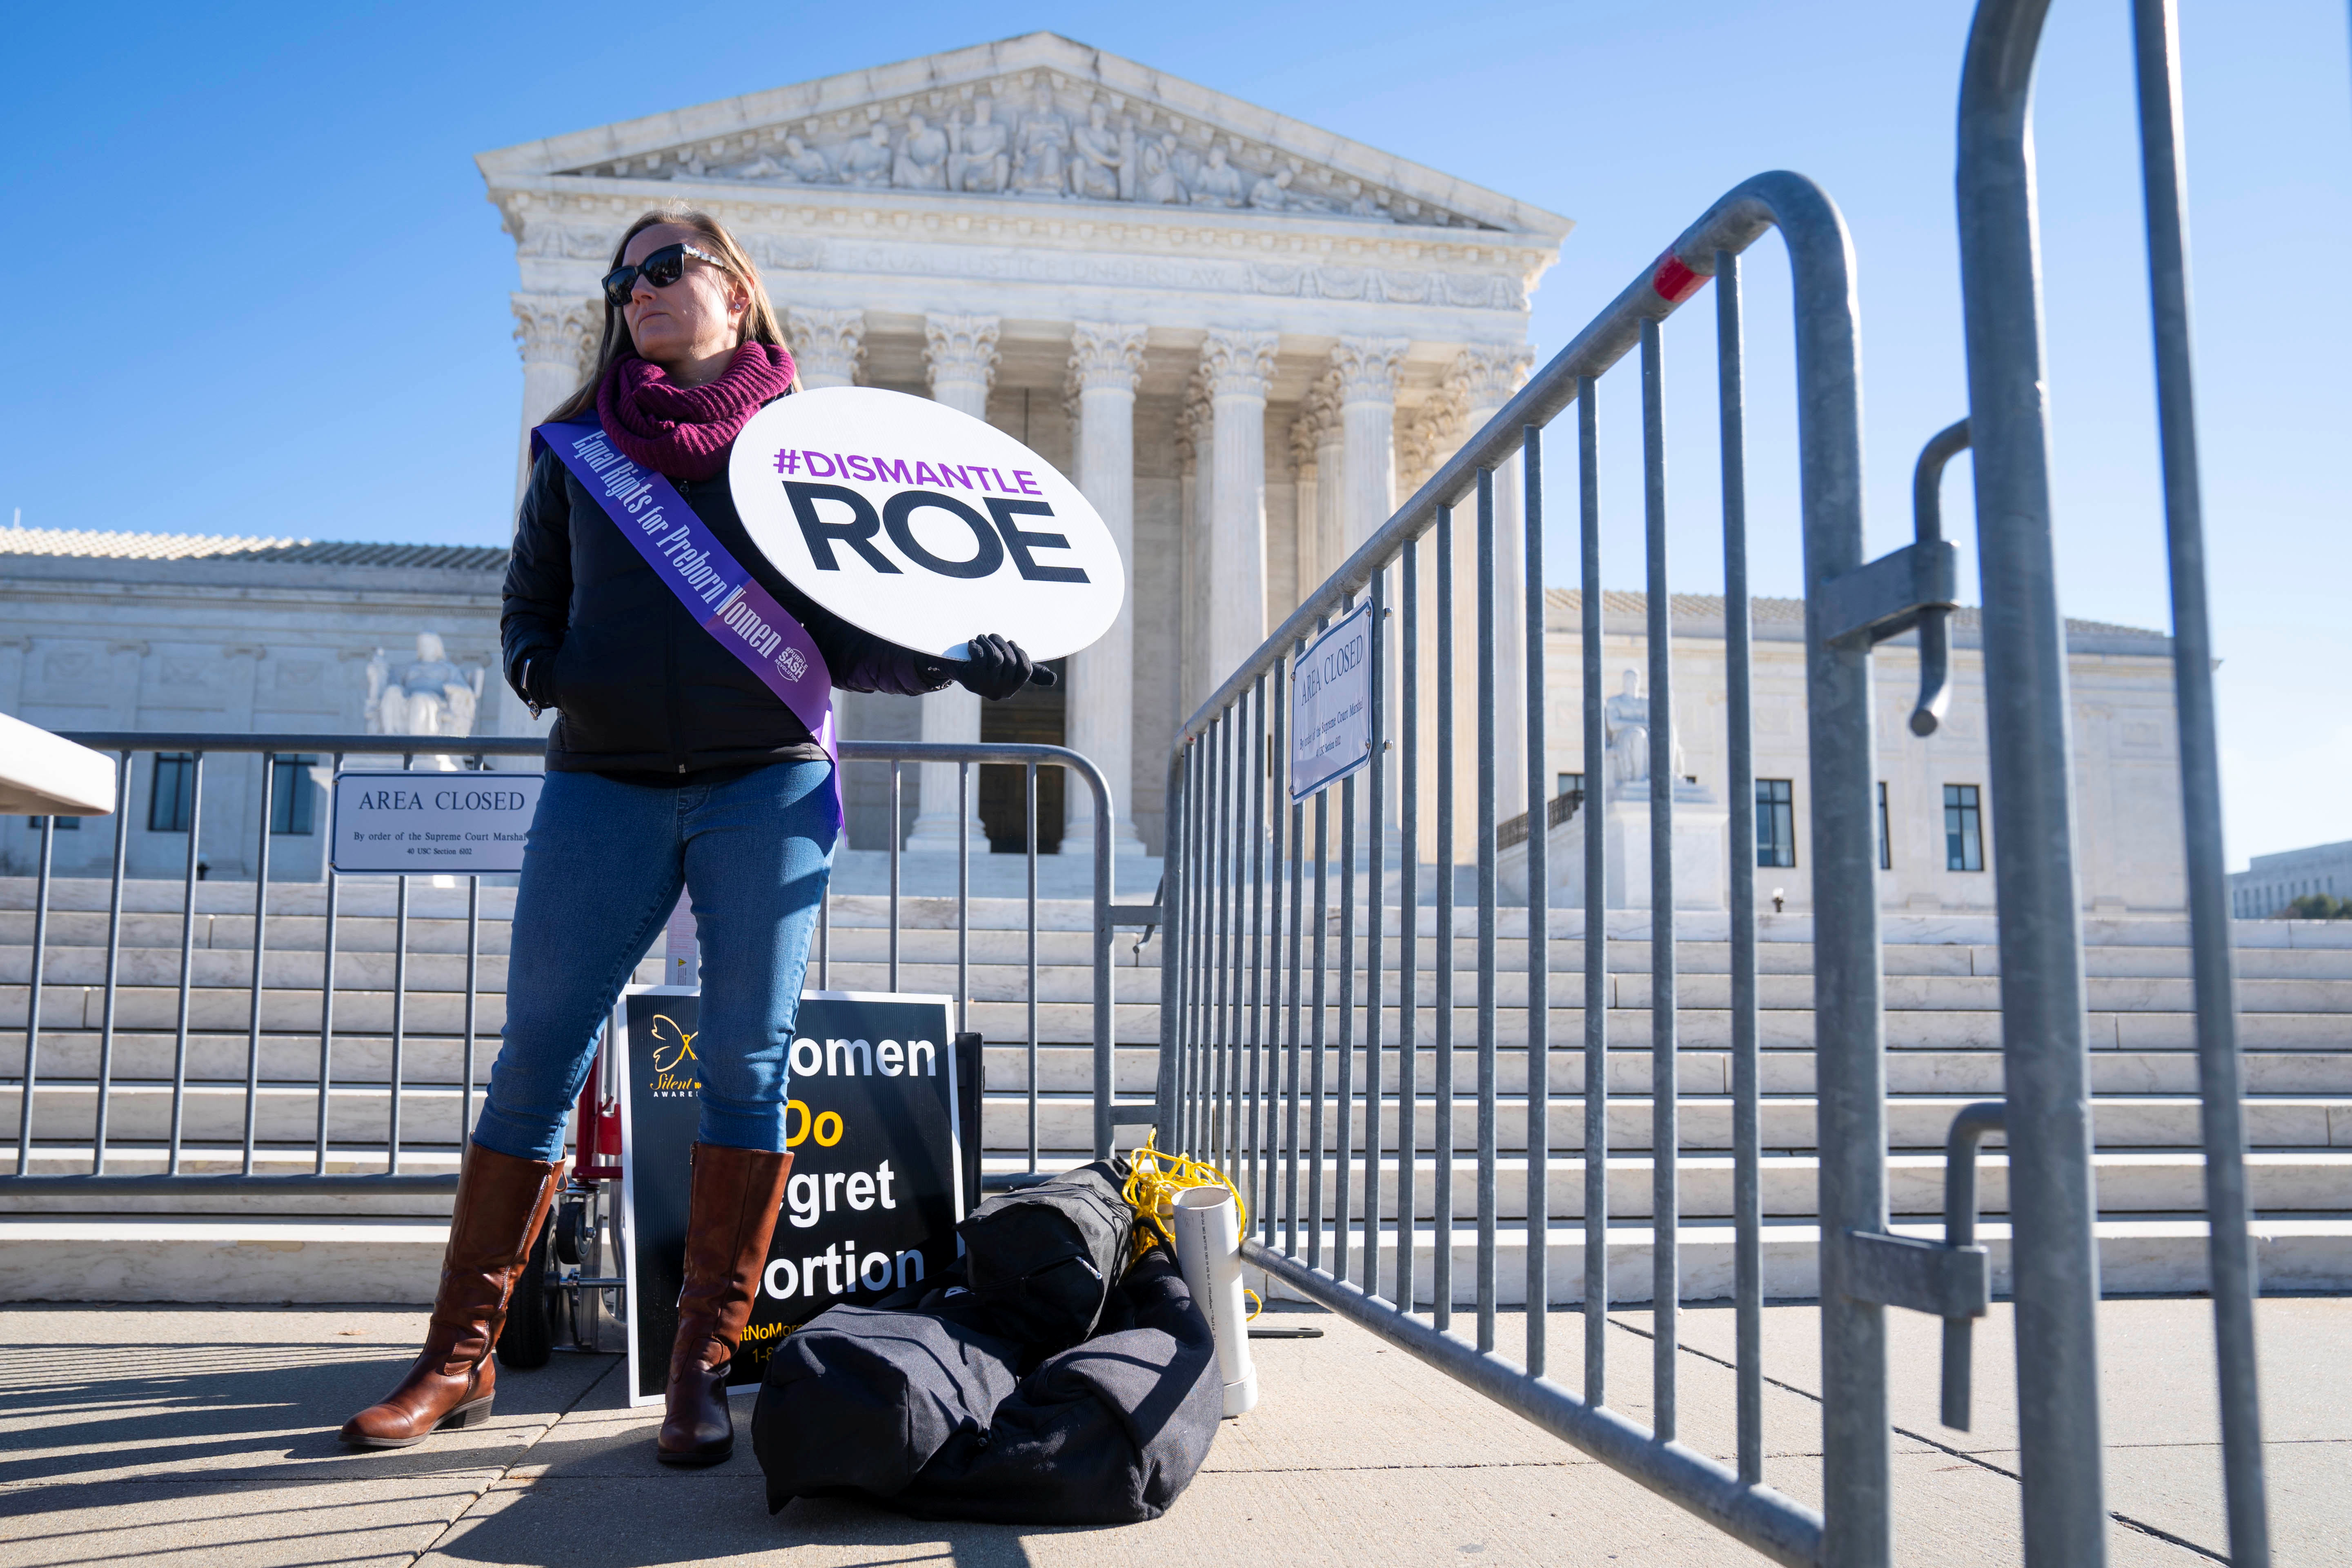 Activists hold anti-choice demonstration on anniversary of Roe v. Wade at U.S. Supreme Court in Washington